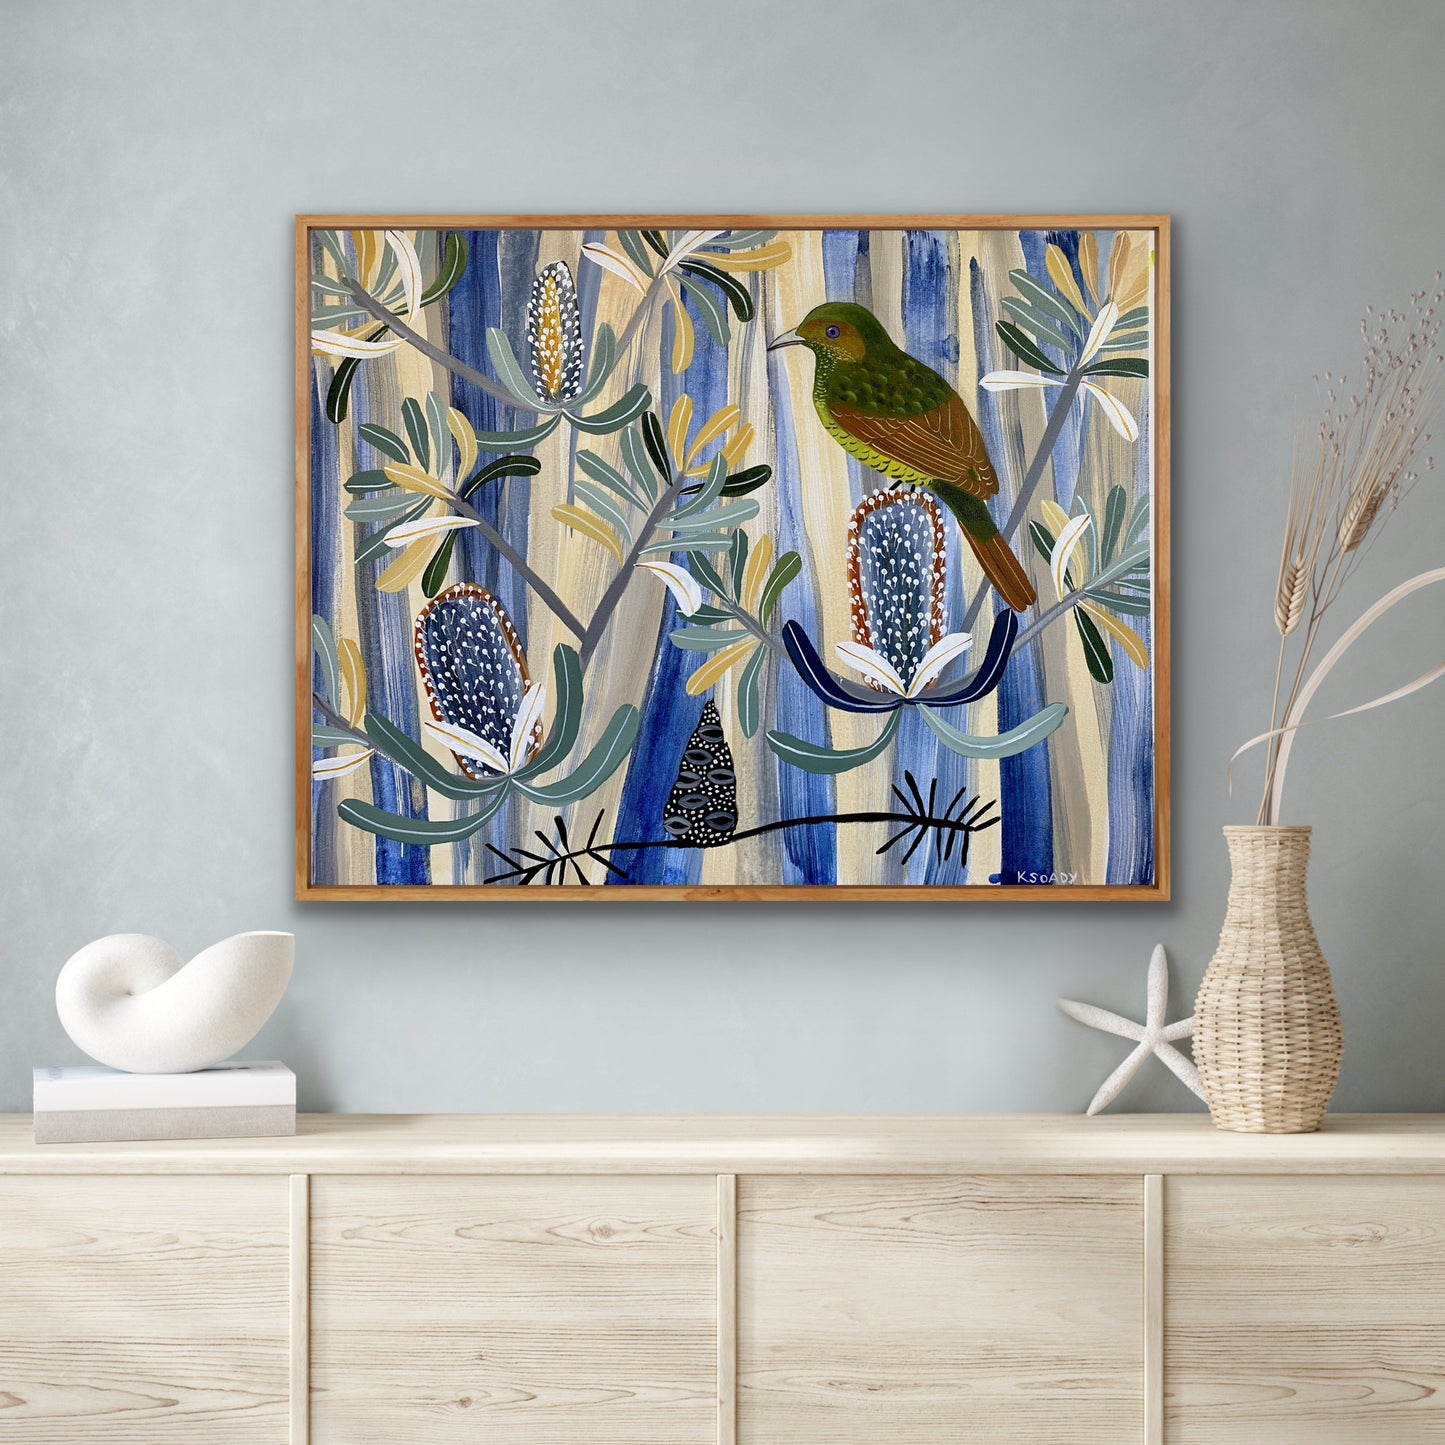 Bowerbird and the Banksia